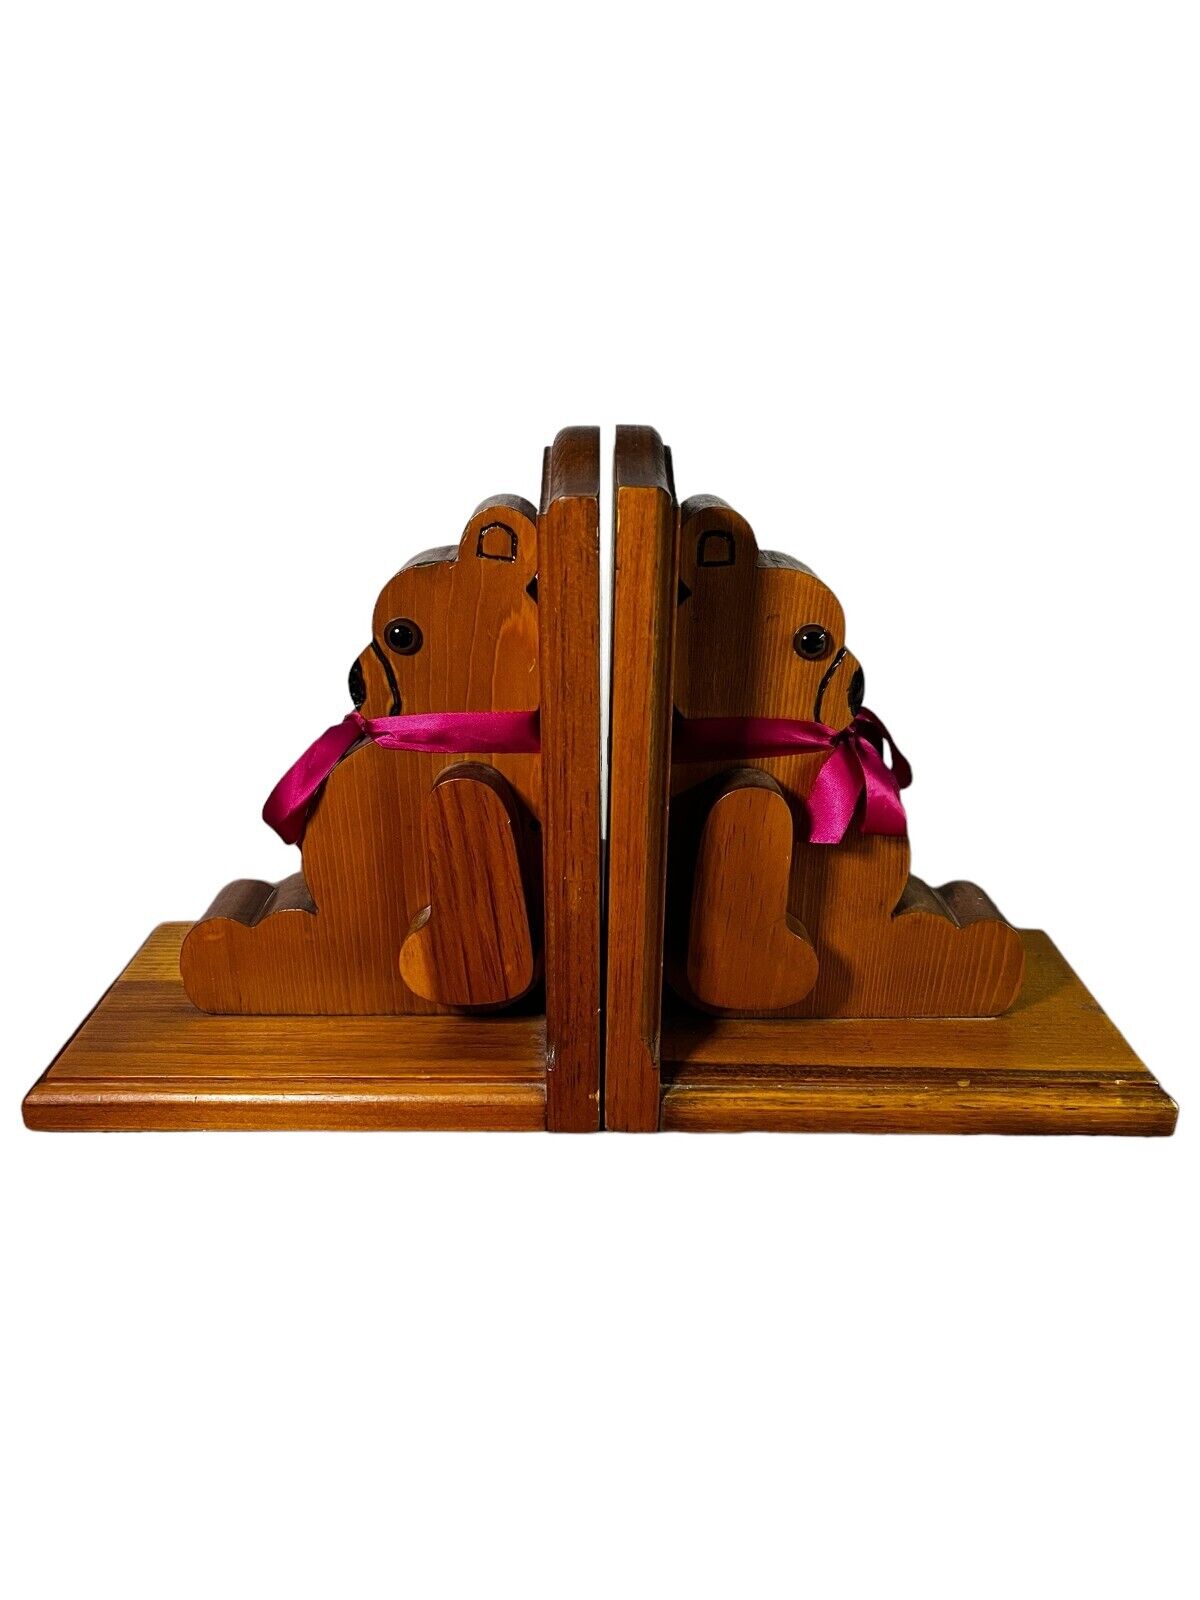 Vintage Country Charms Crafts Wooden Teddy Bear Bookends